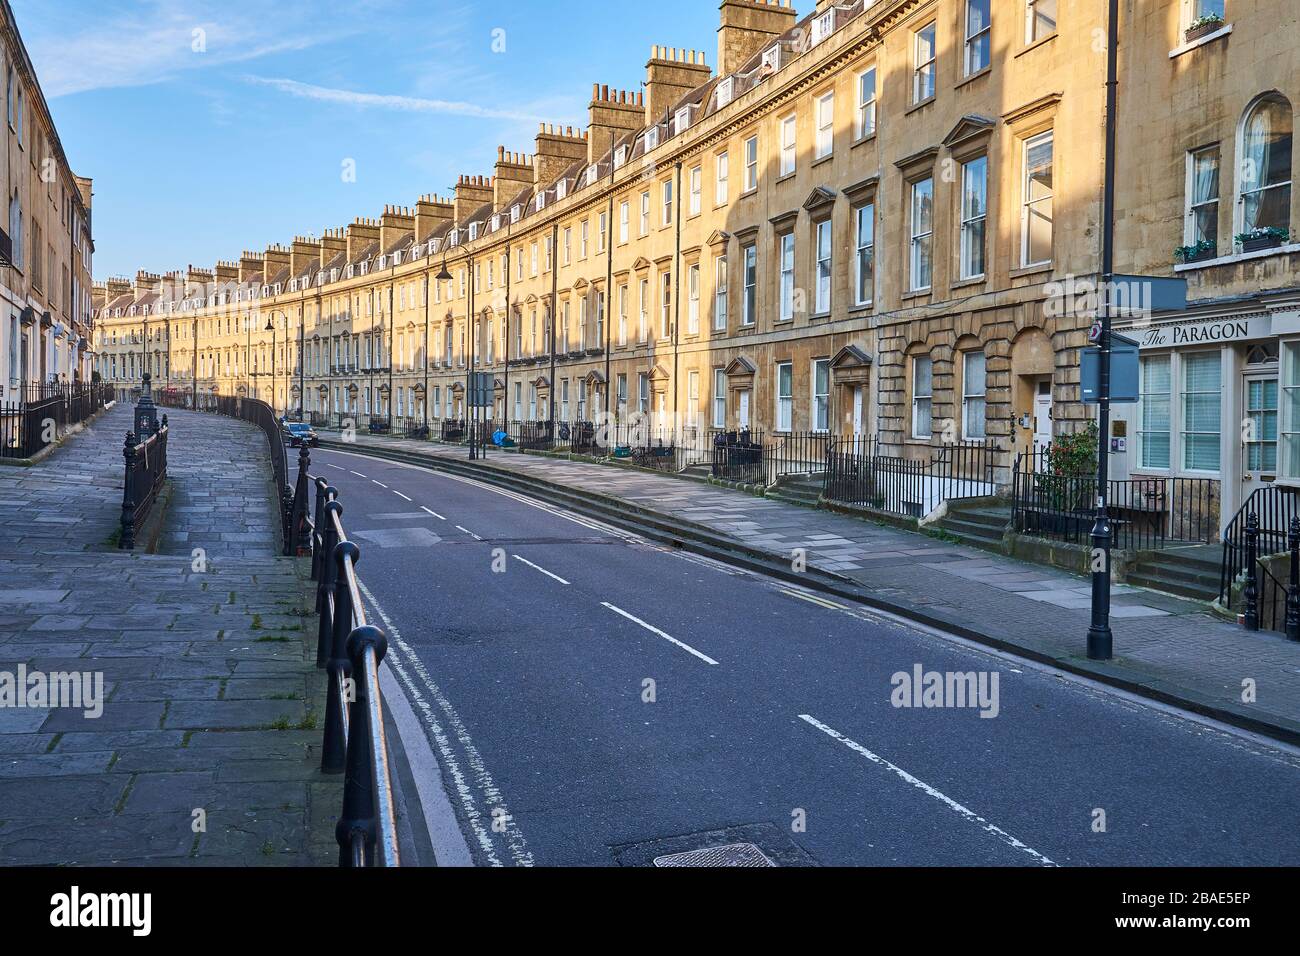 Bath, Somerset, England - March 26, 2020: The tourist city of Bath is deserted during the Coronavirus outbreak. The Paragon Stock Photo